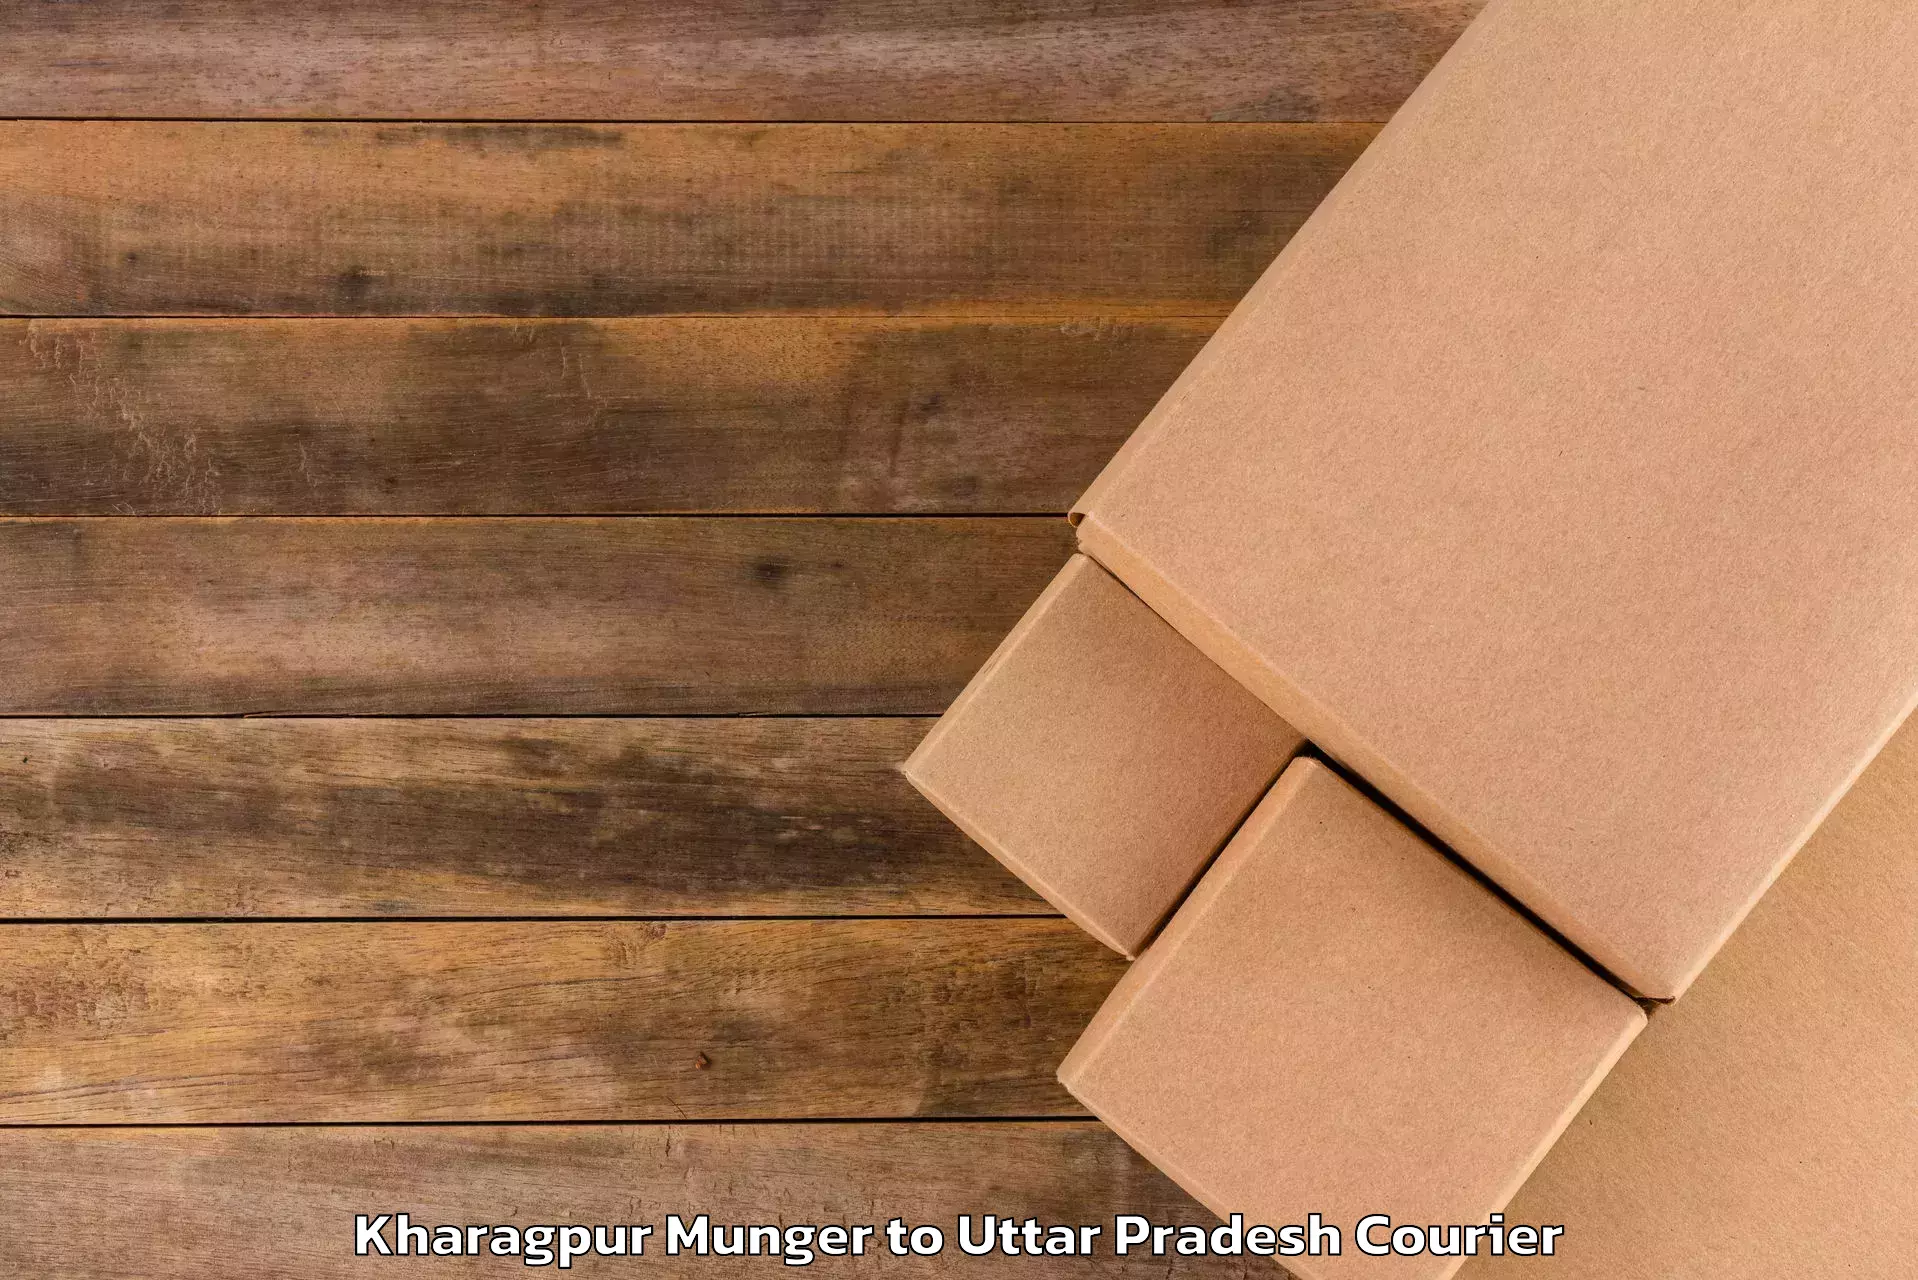 Luggage transport consultancy Kharagpur Munger to Phephna